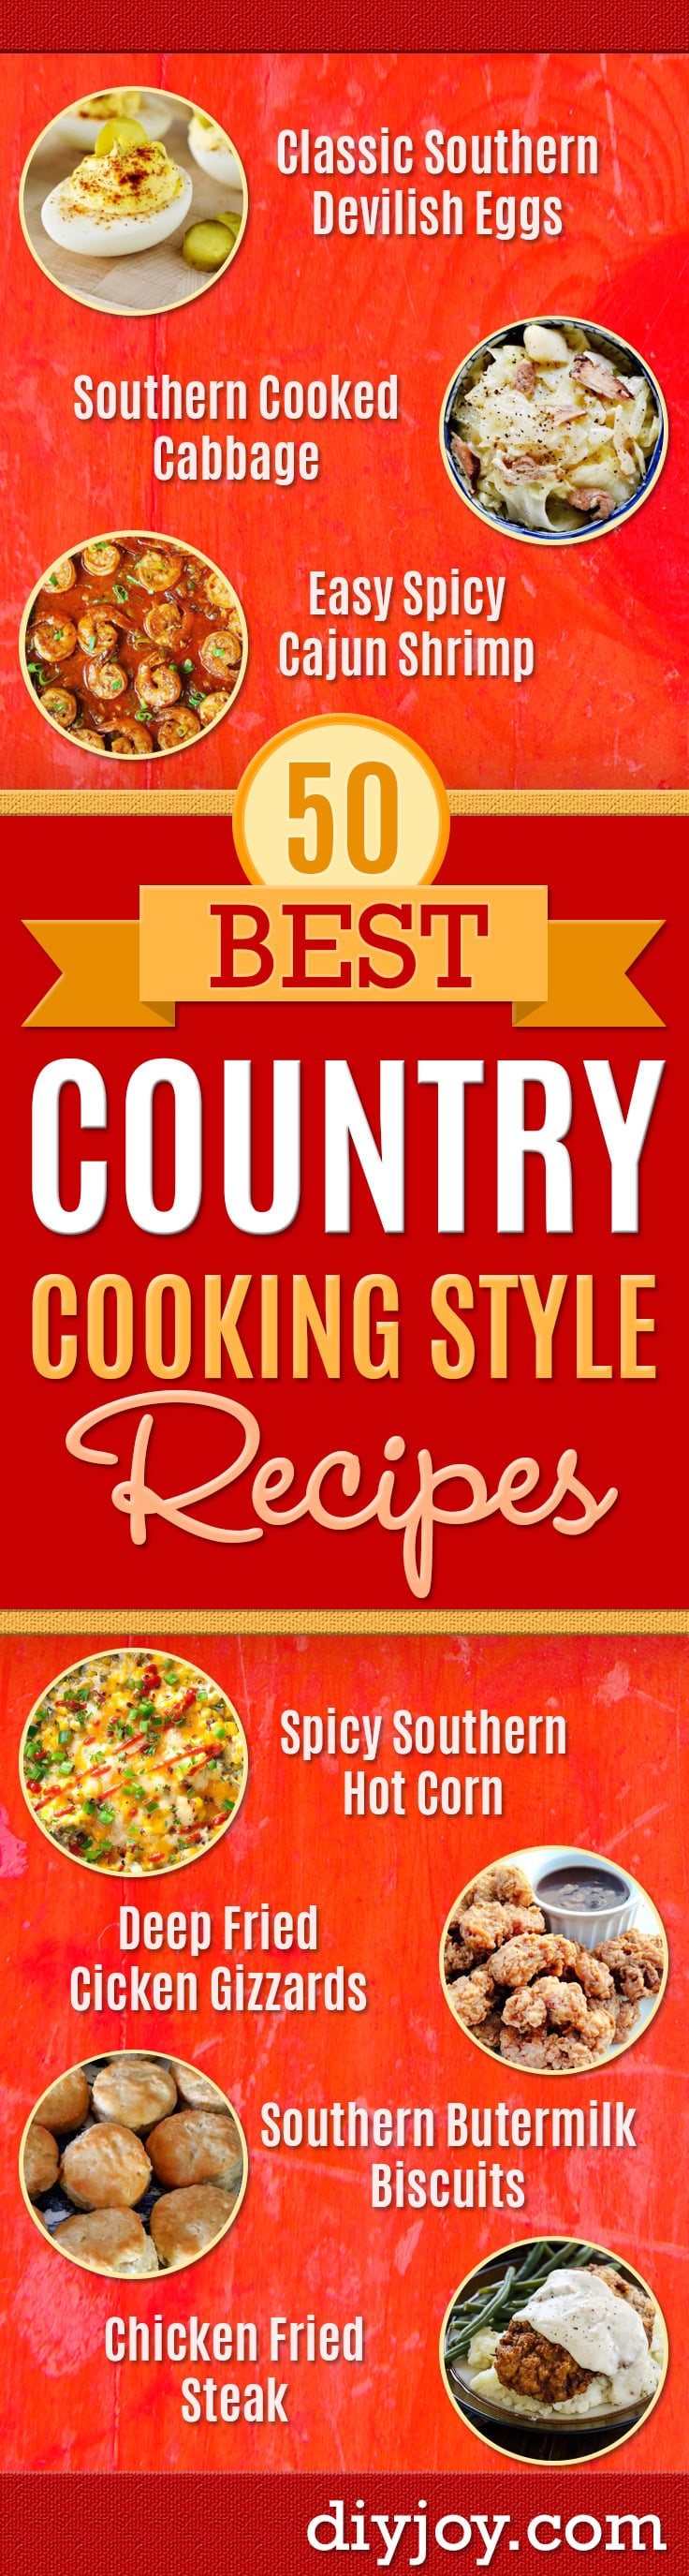 50 Best Country Cooking Style Recipes